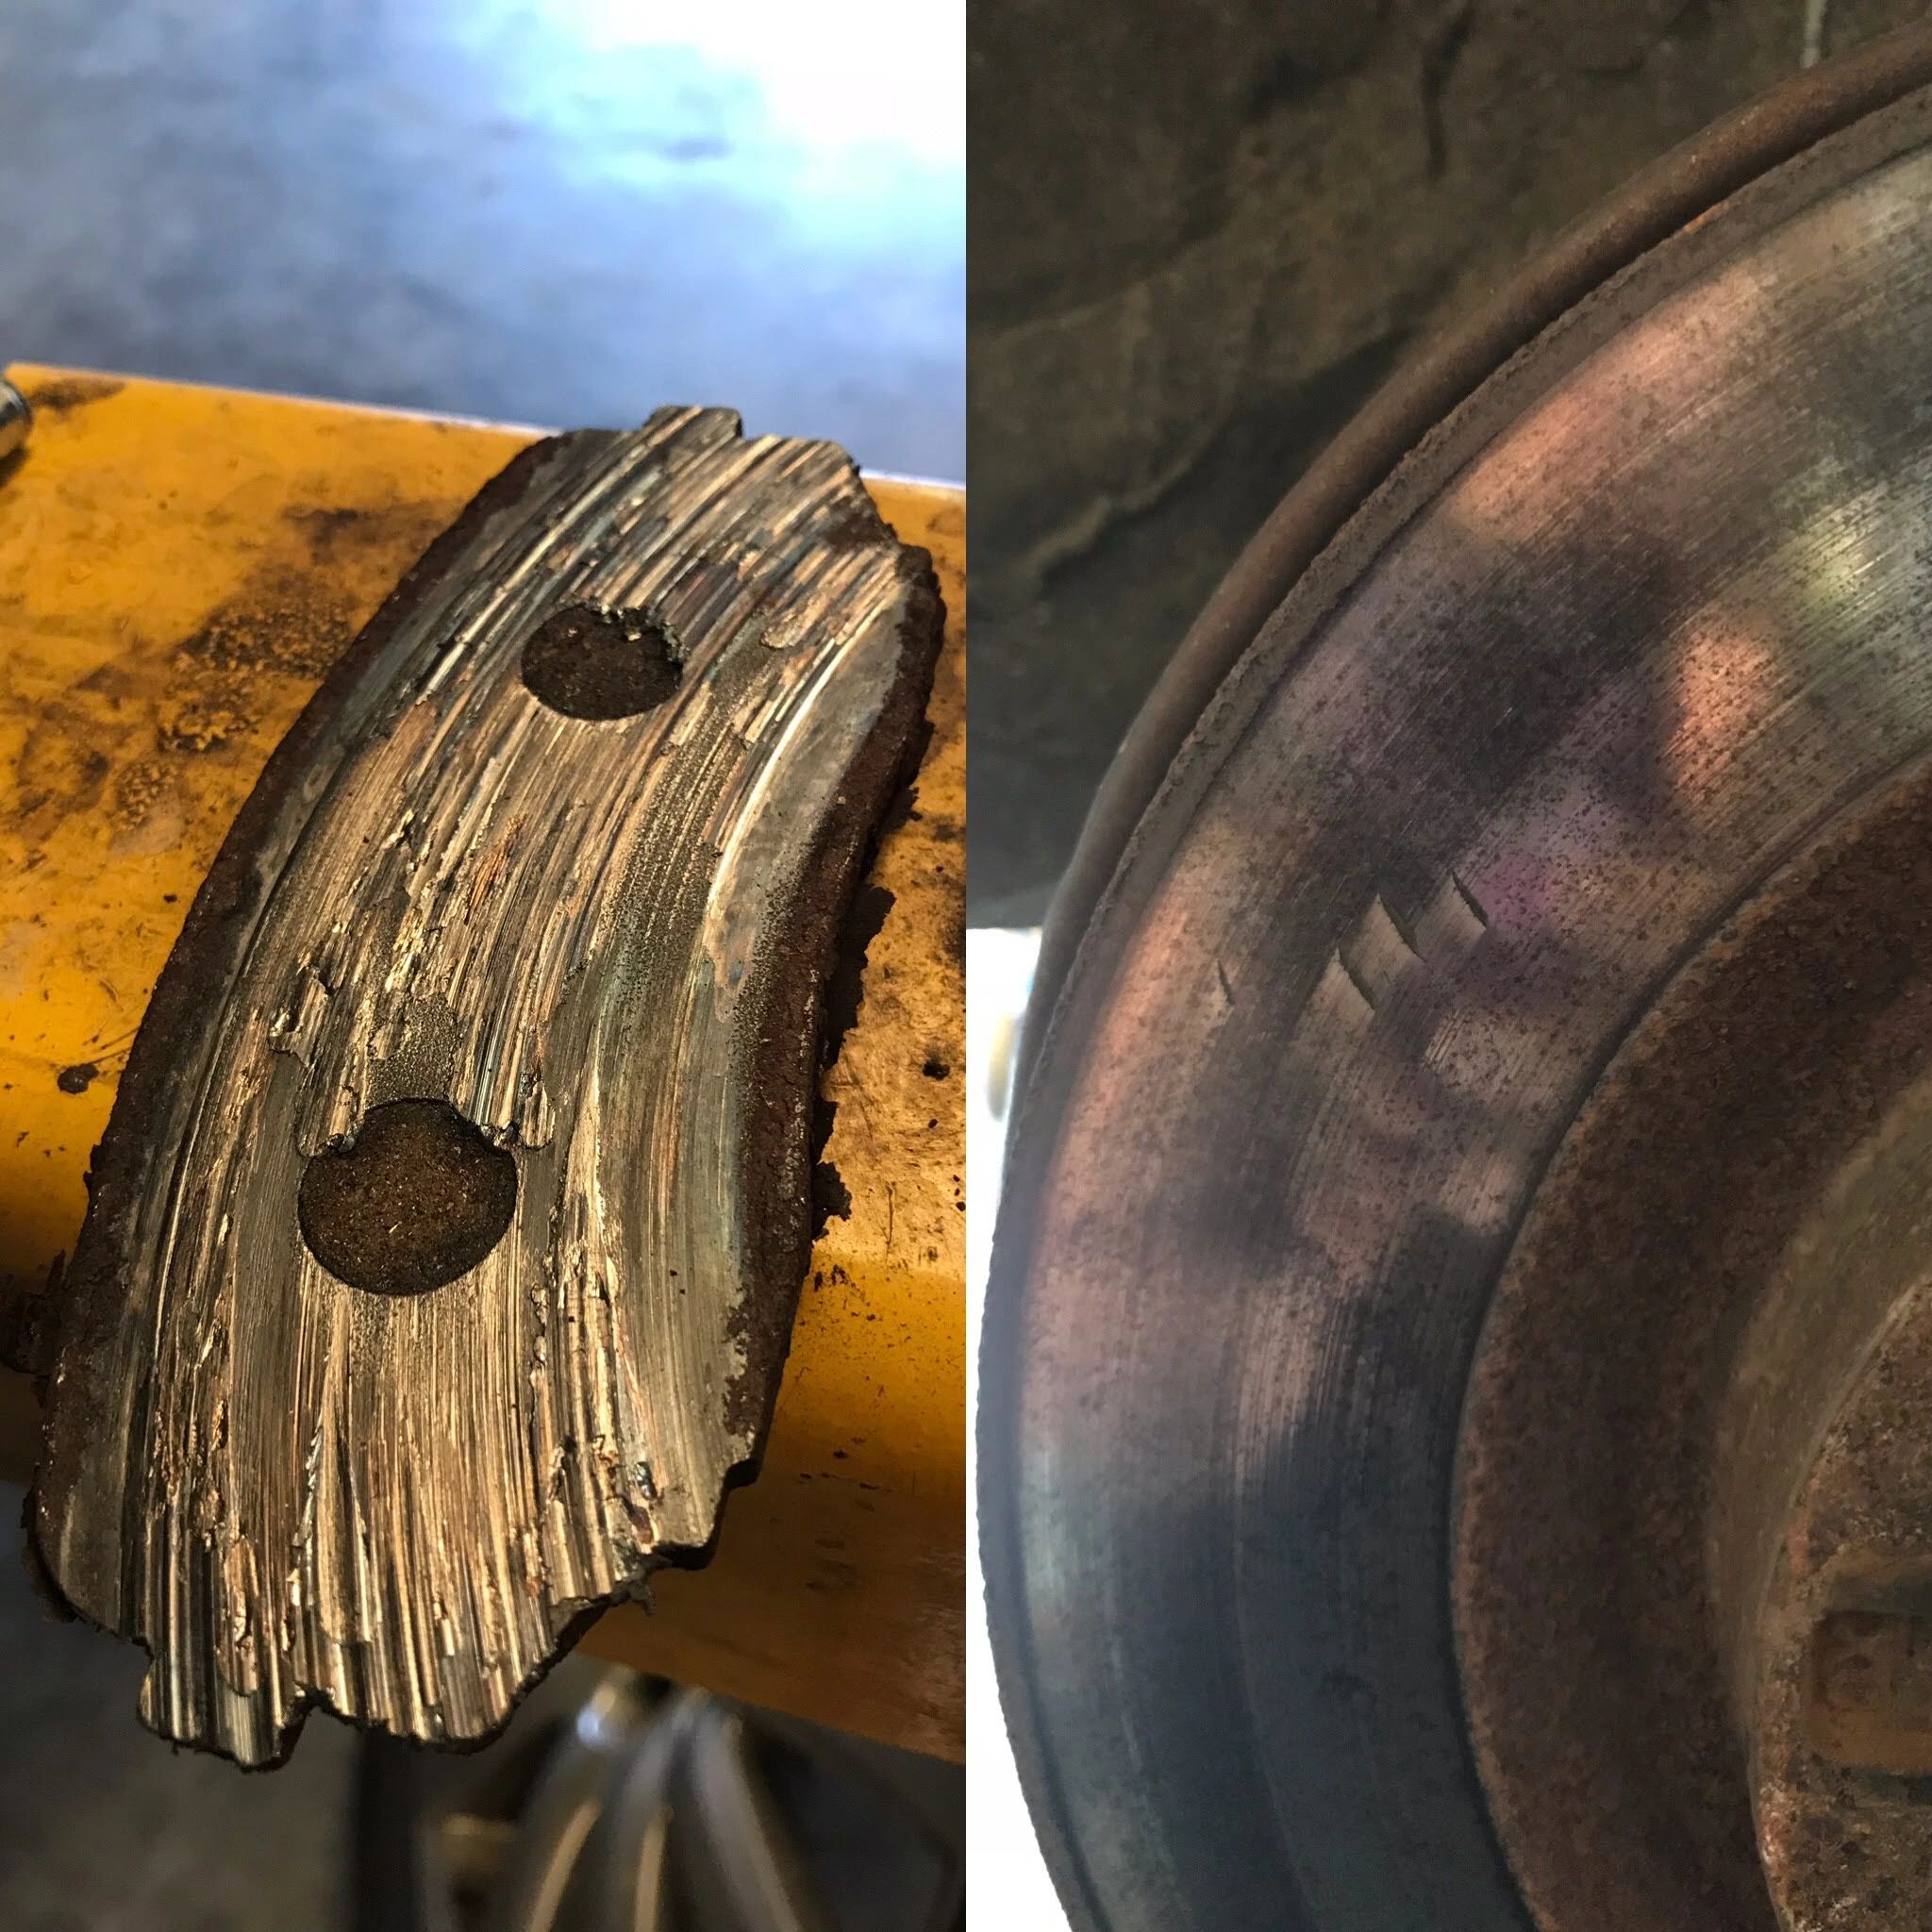 Worn out brake pad and rotor from a 2008 MAZDA CX-9.